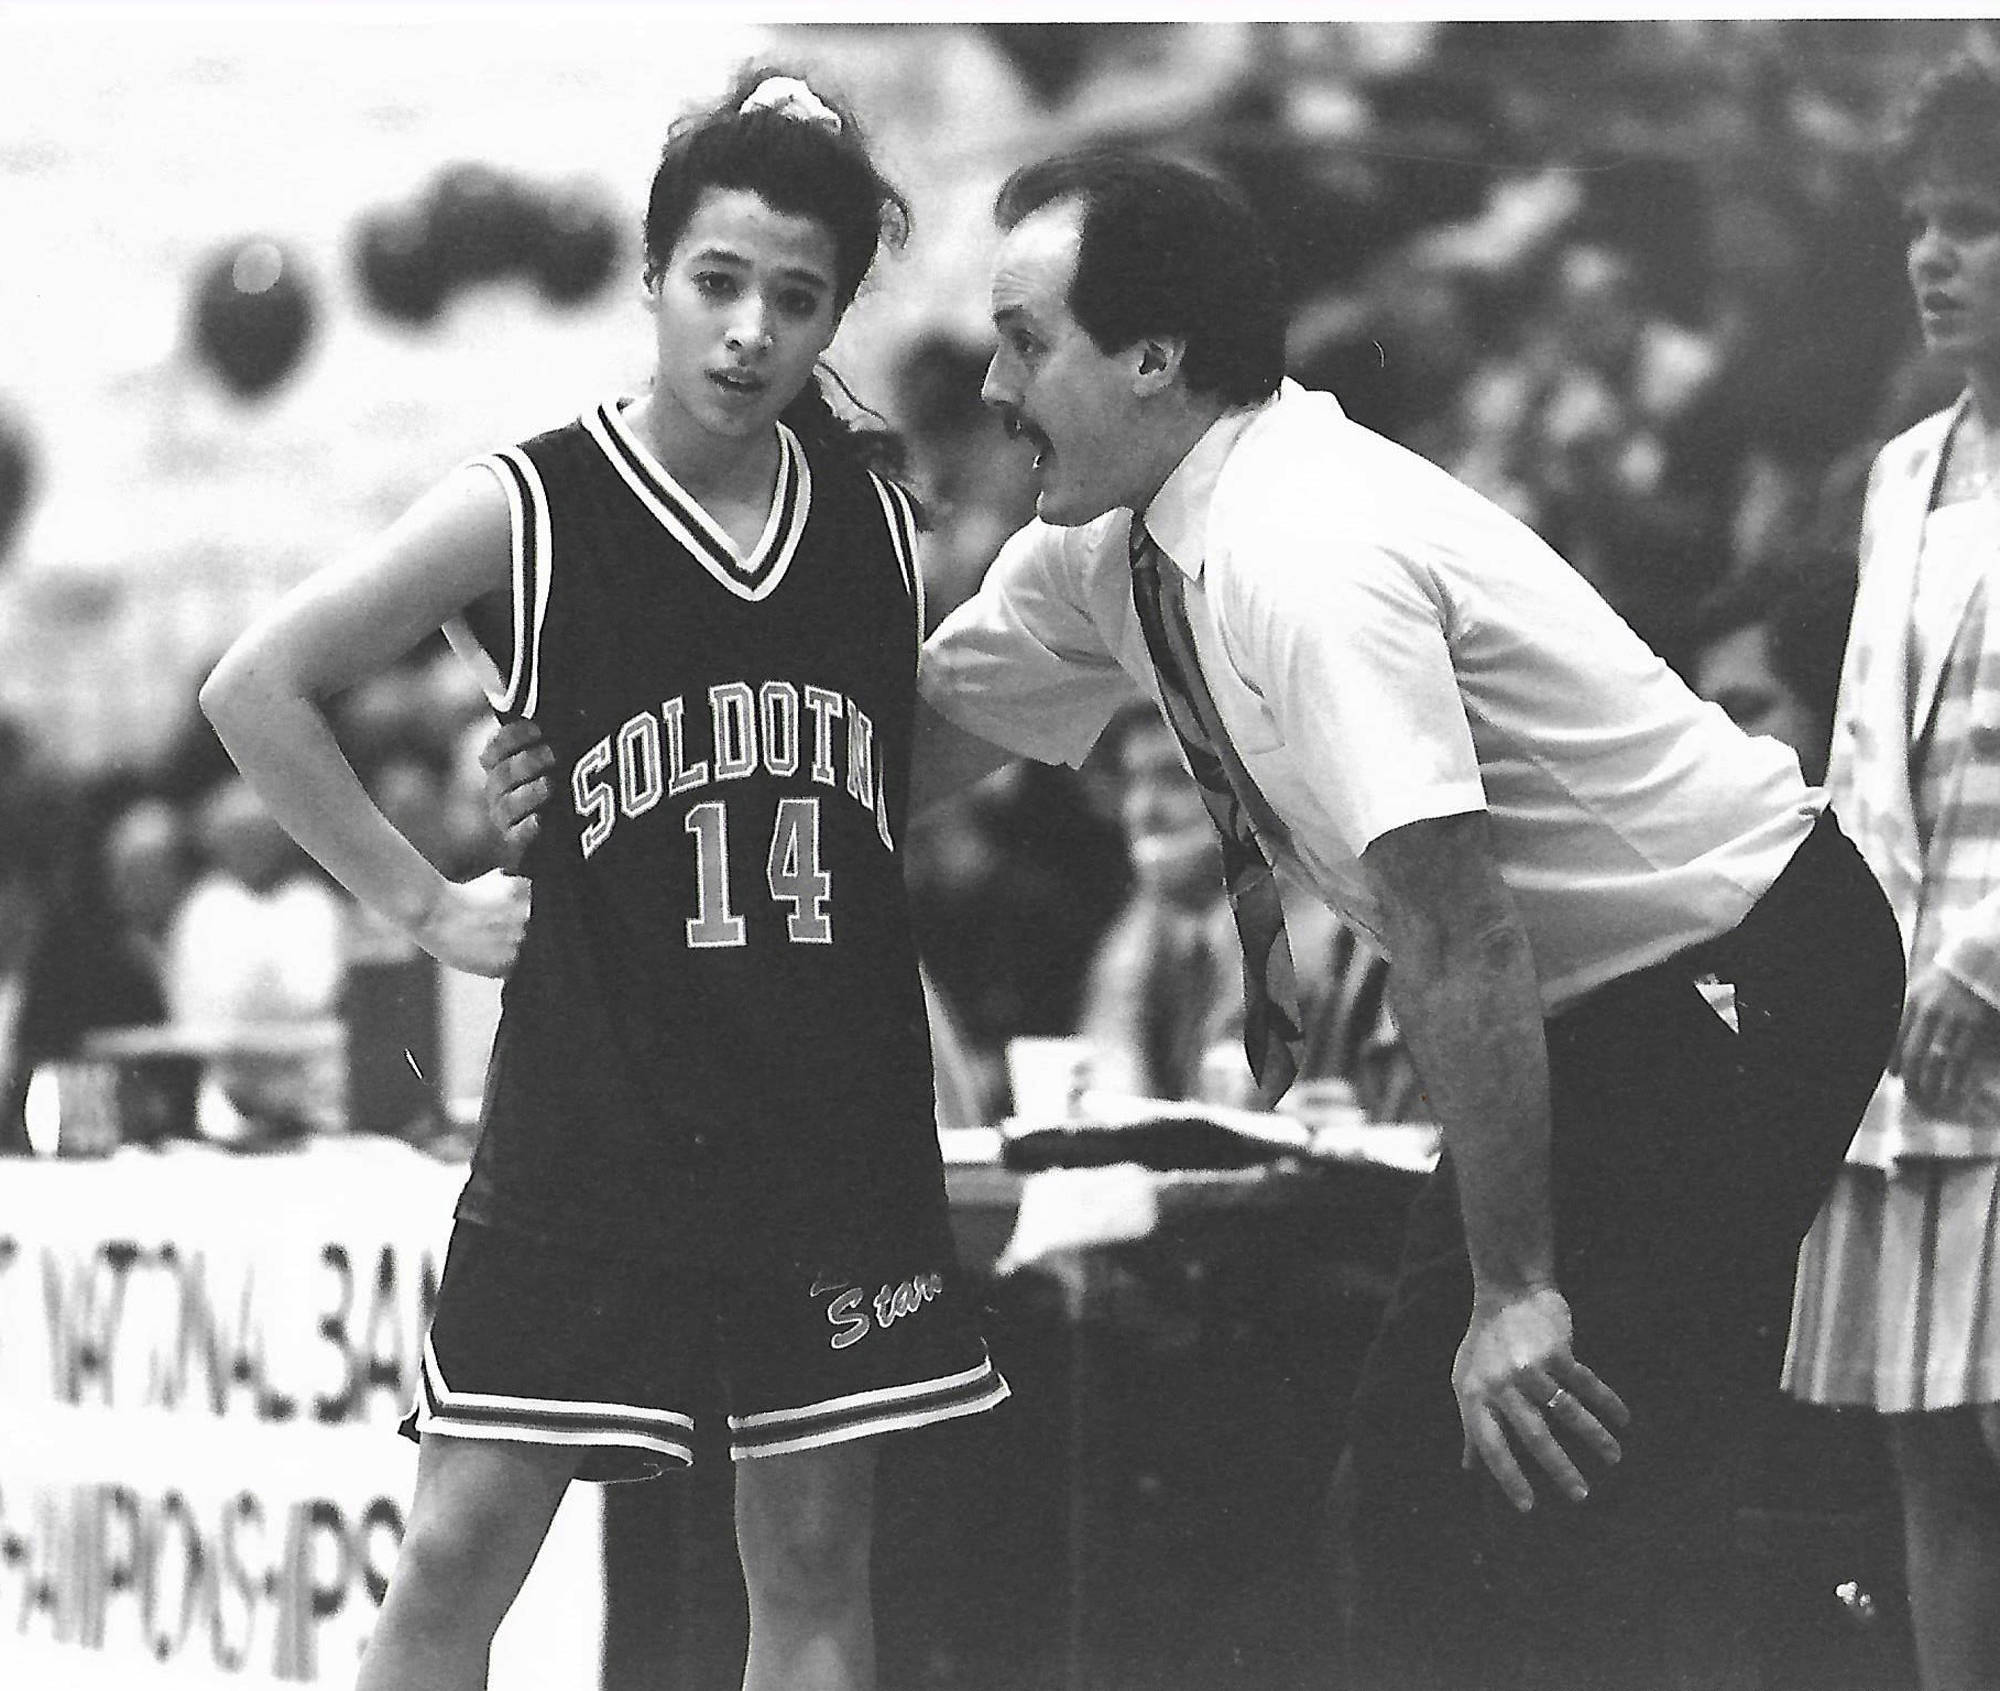 Former Soldotna High School girls basketball coach Dan Gensel gives words of encouragement to Melissa Smith in the 1993 Class 3A state championship game. (Photo provided by Dan Gensel)